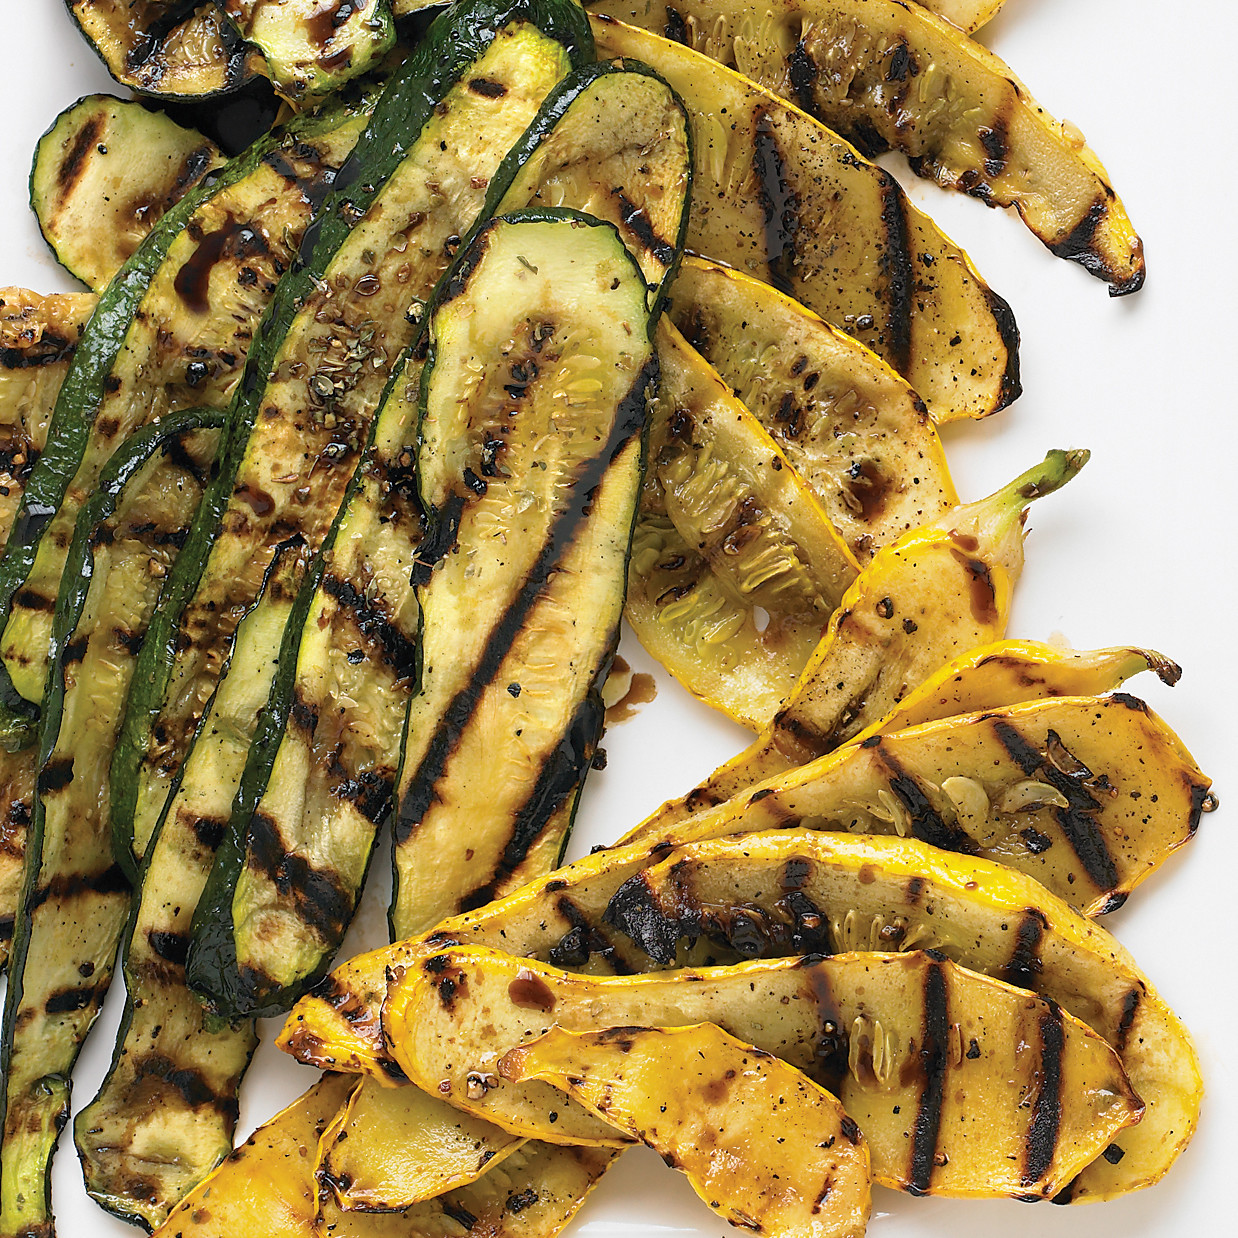 Zucchini And Summer Squash Recipes
 Grilled Zucchini and Summer Squash Recipe